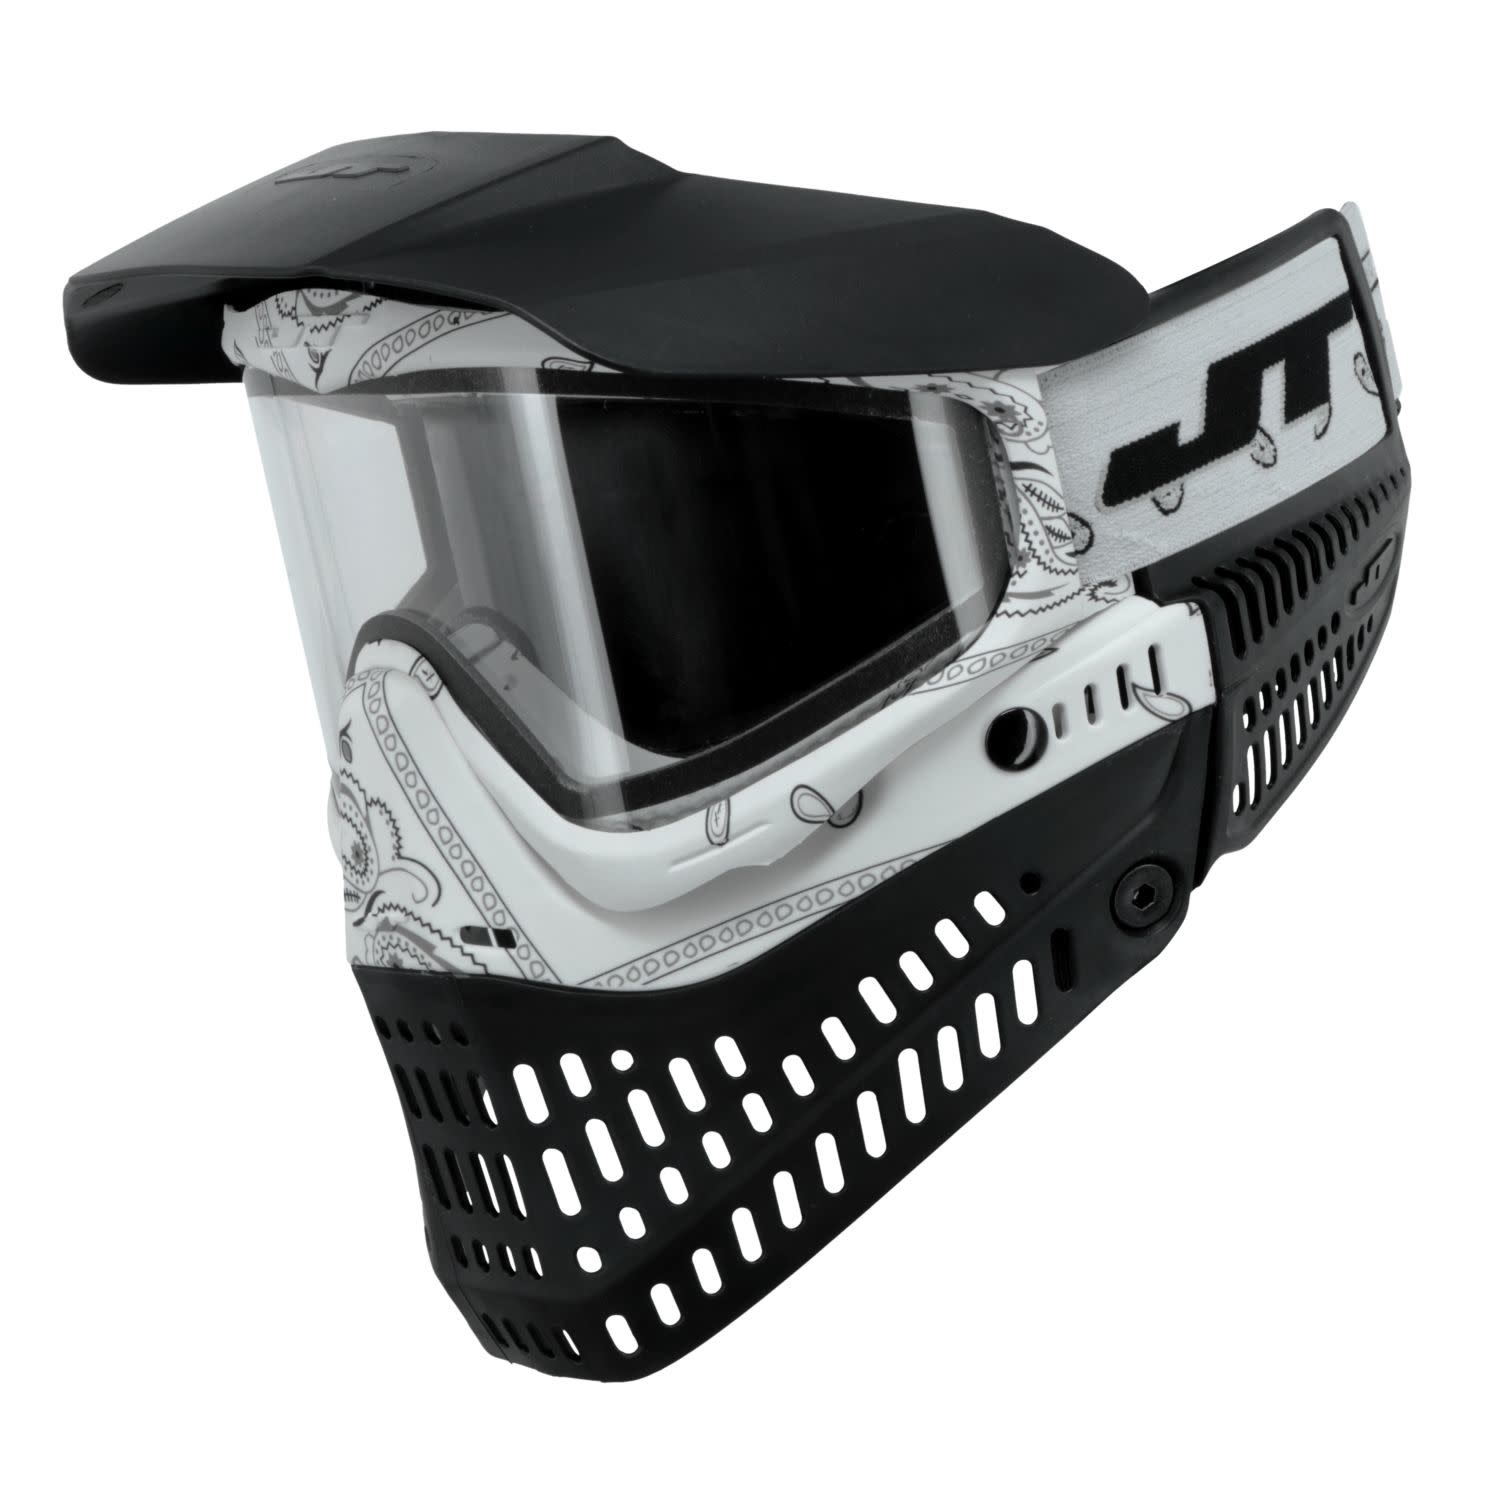 Jt Replacement Goggle Strap - Tao Series Woven - Black/Red